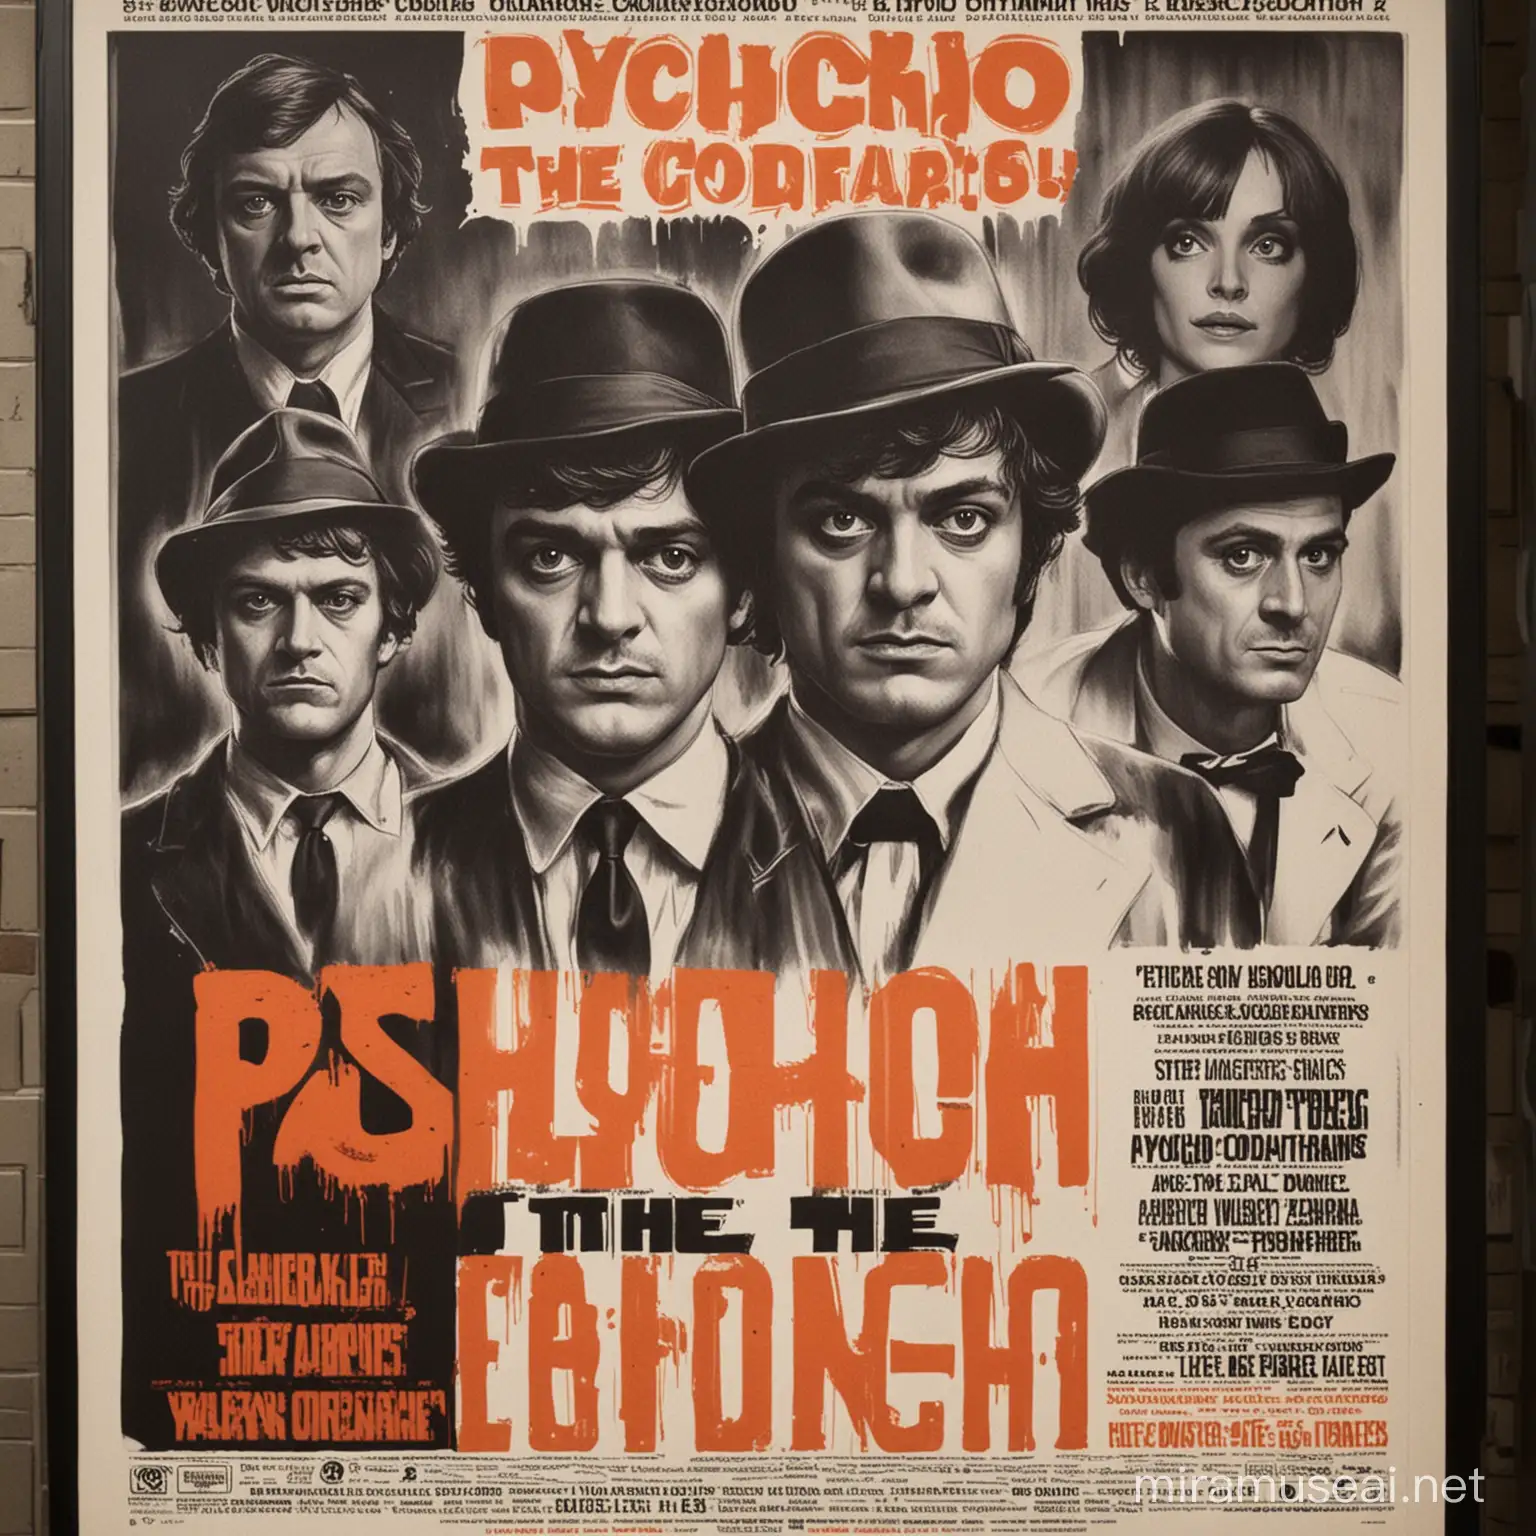 Classic Film Poster A Clockwork Orange Psycho and The Godfather Screening